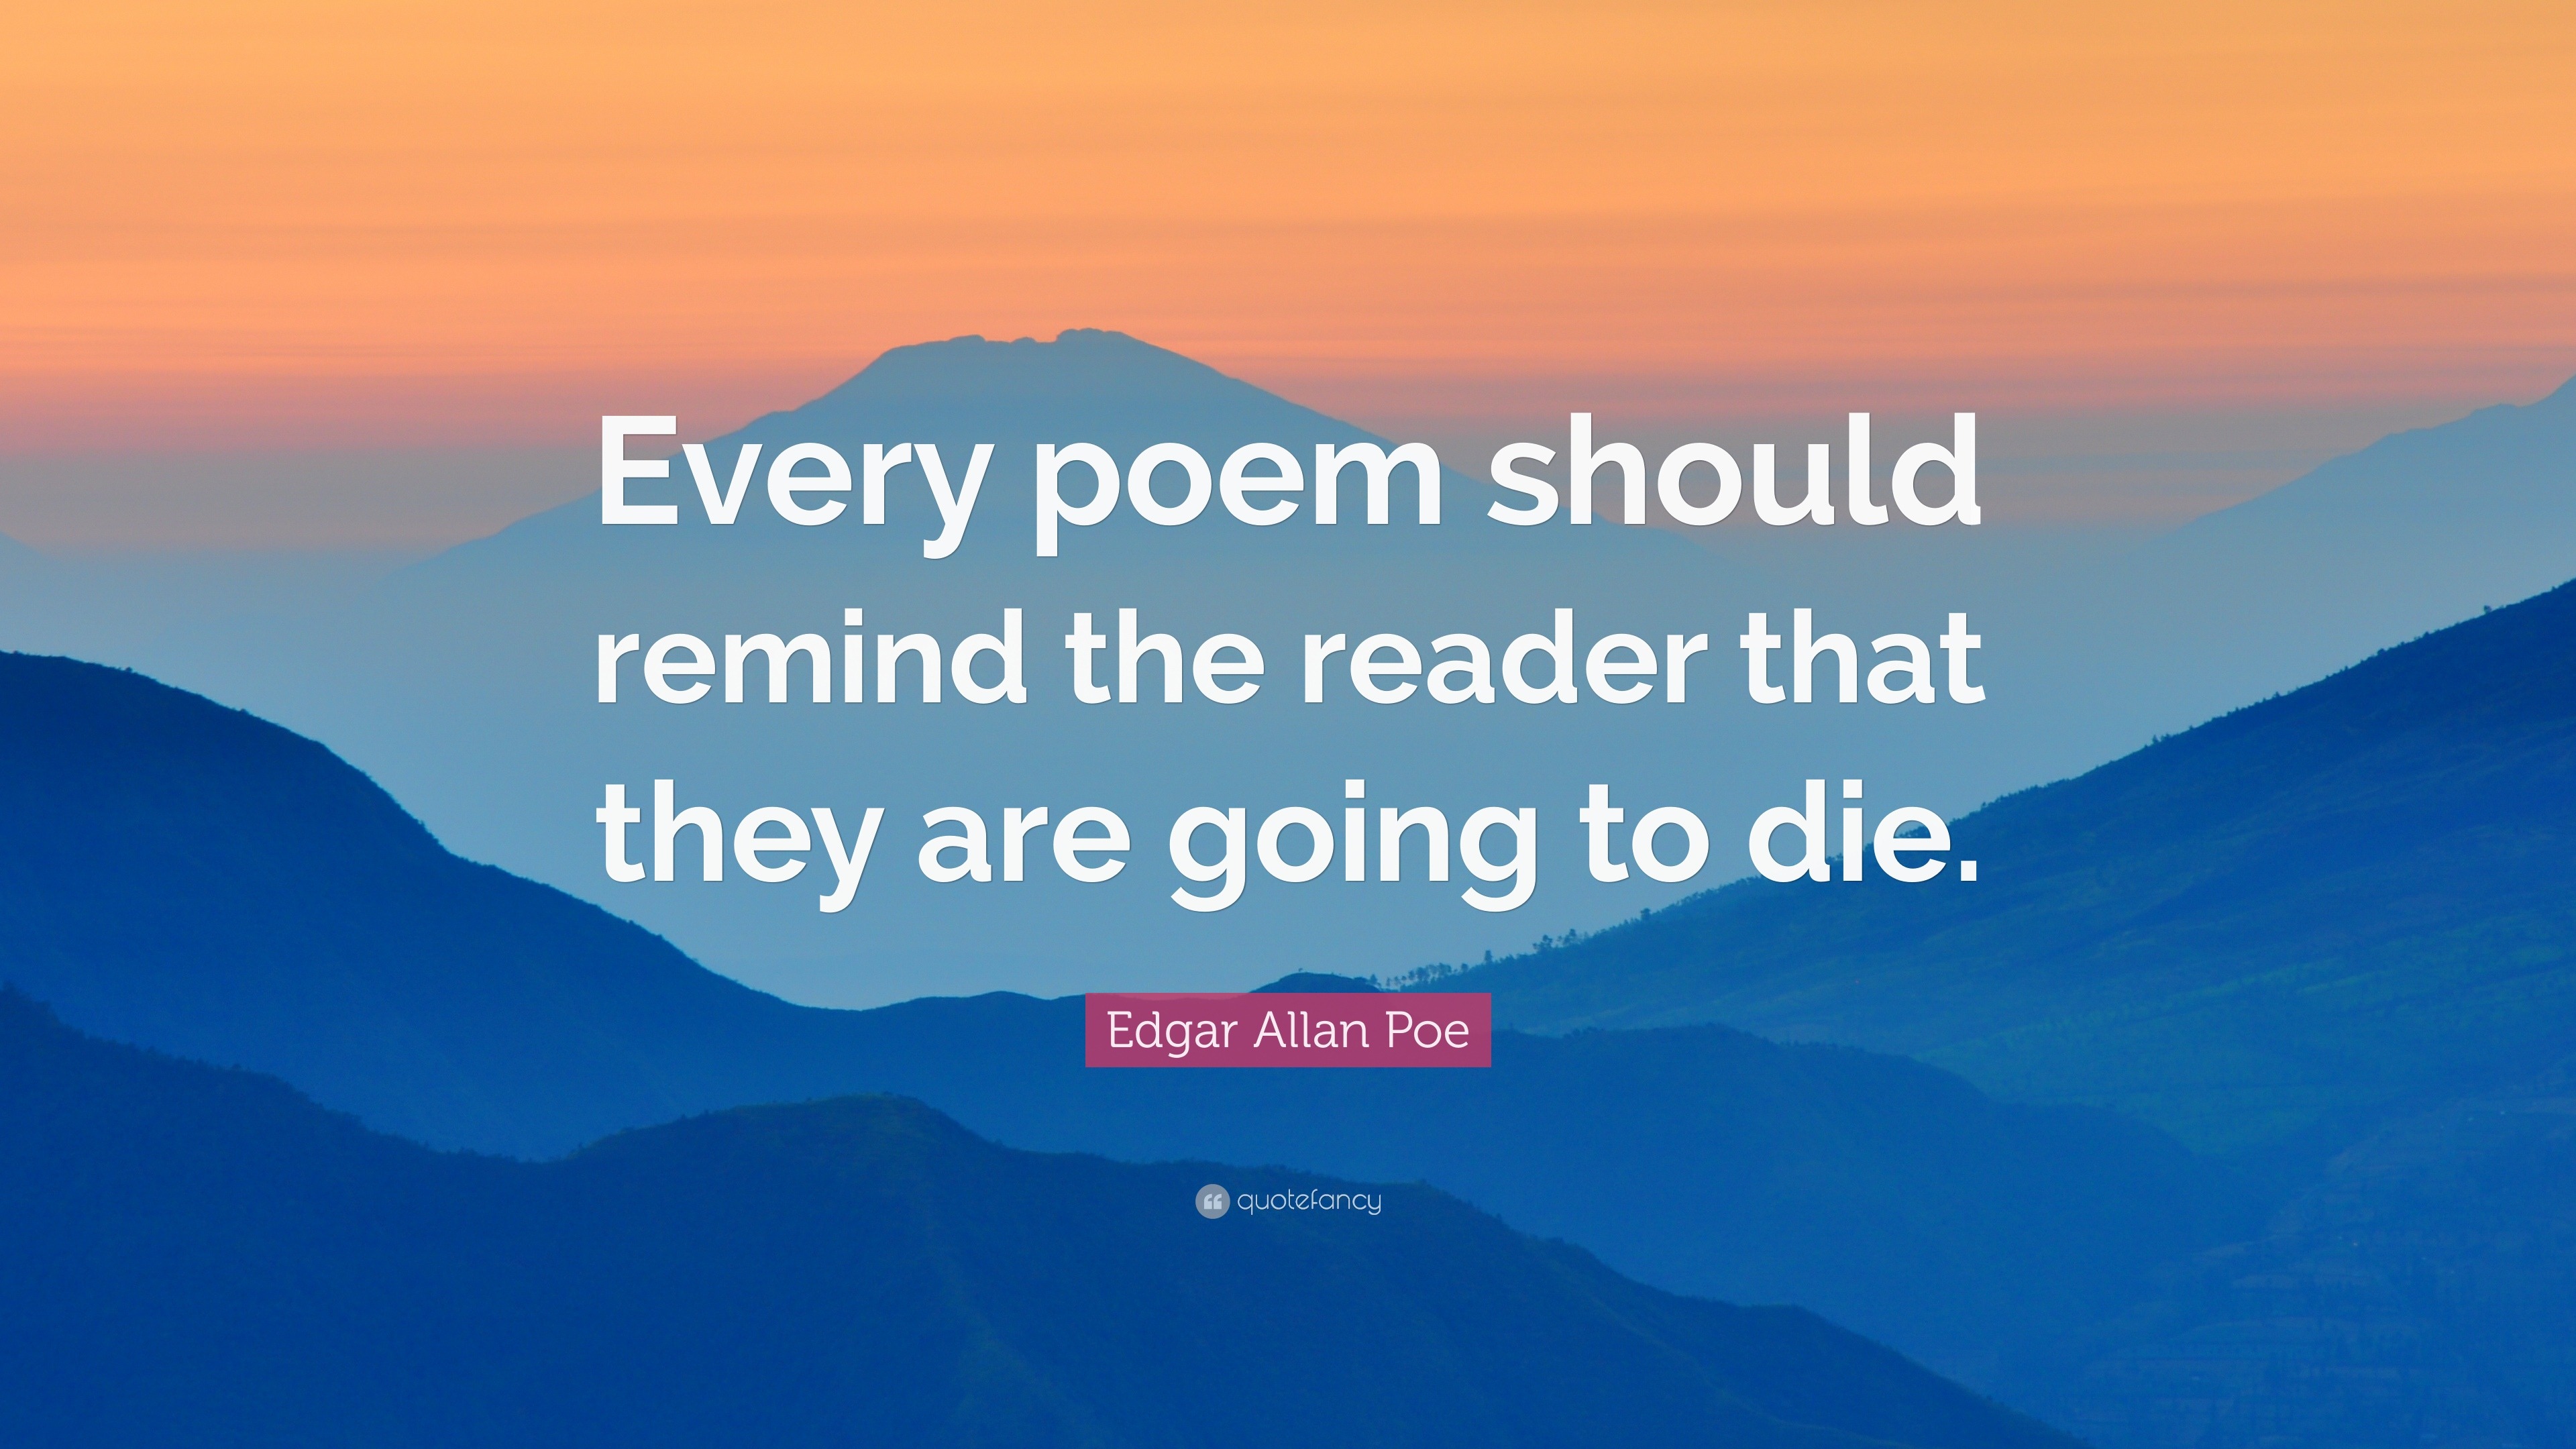 Edgar Allan Poe Quote: “Every poem should remind the reader that they